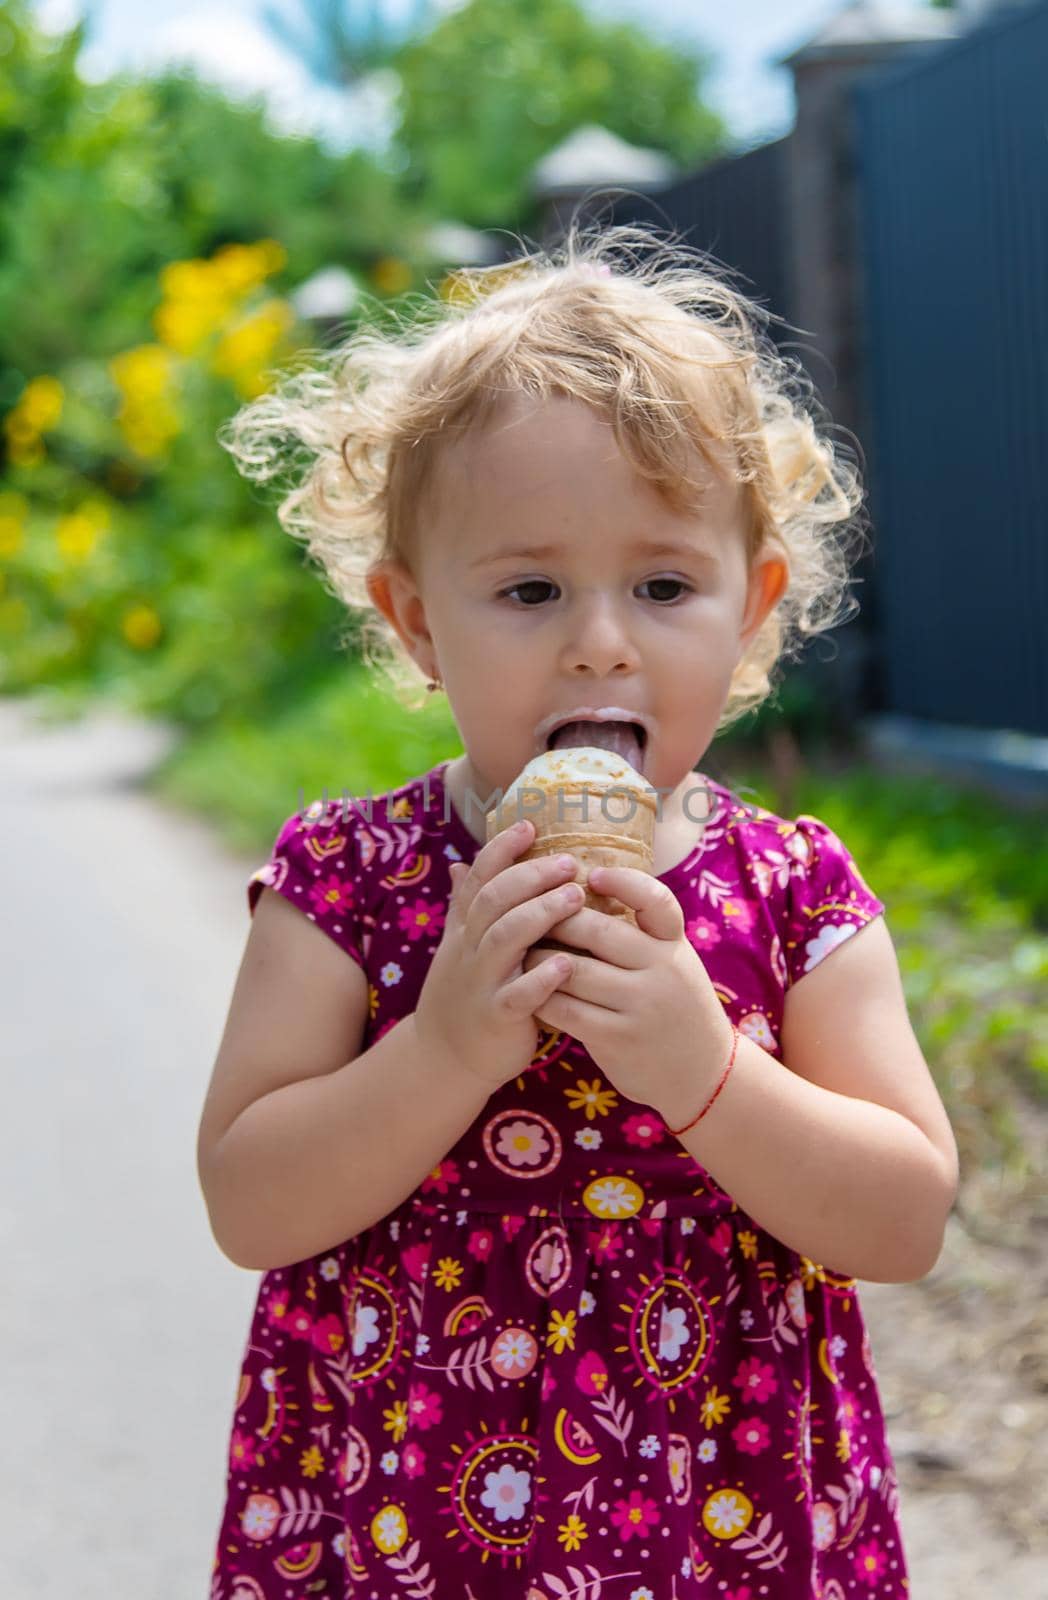 The child eats ice cream on the street. Selective focus. Food.